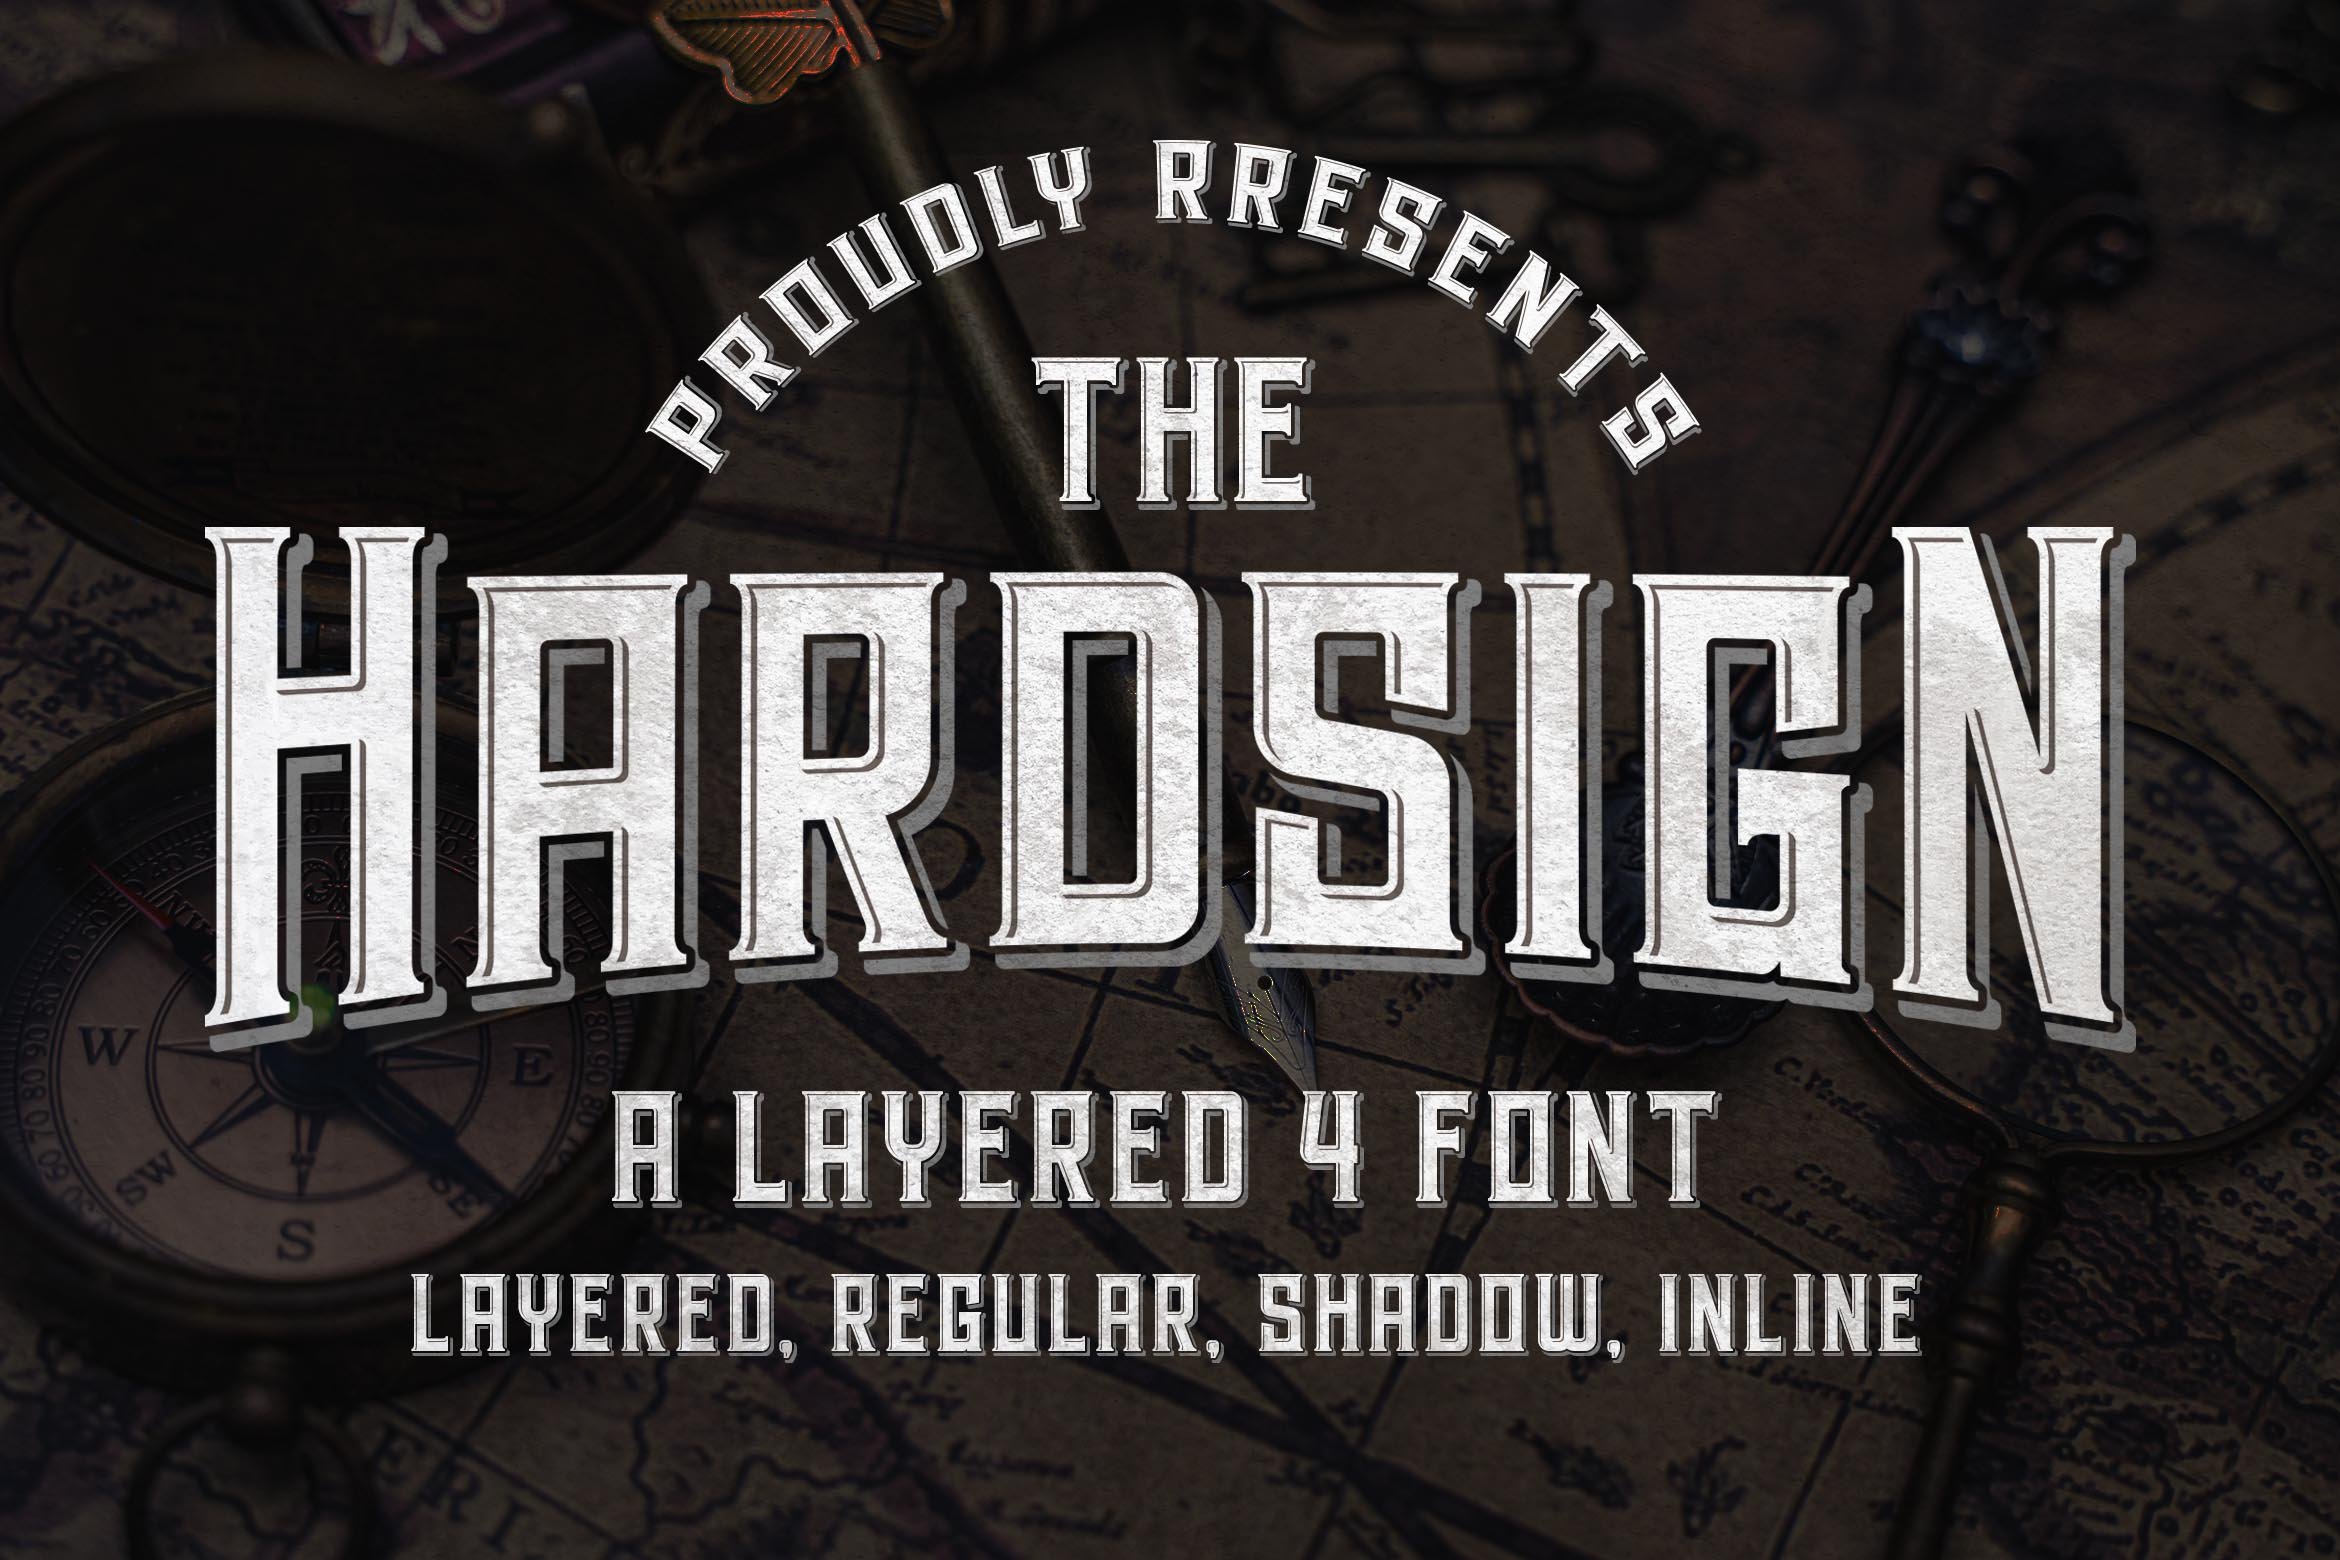 Hardsign - Layered Font cover image.